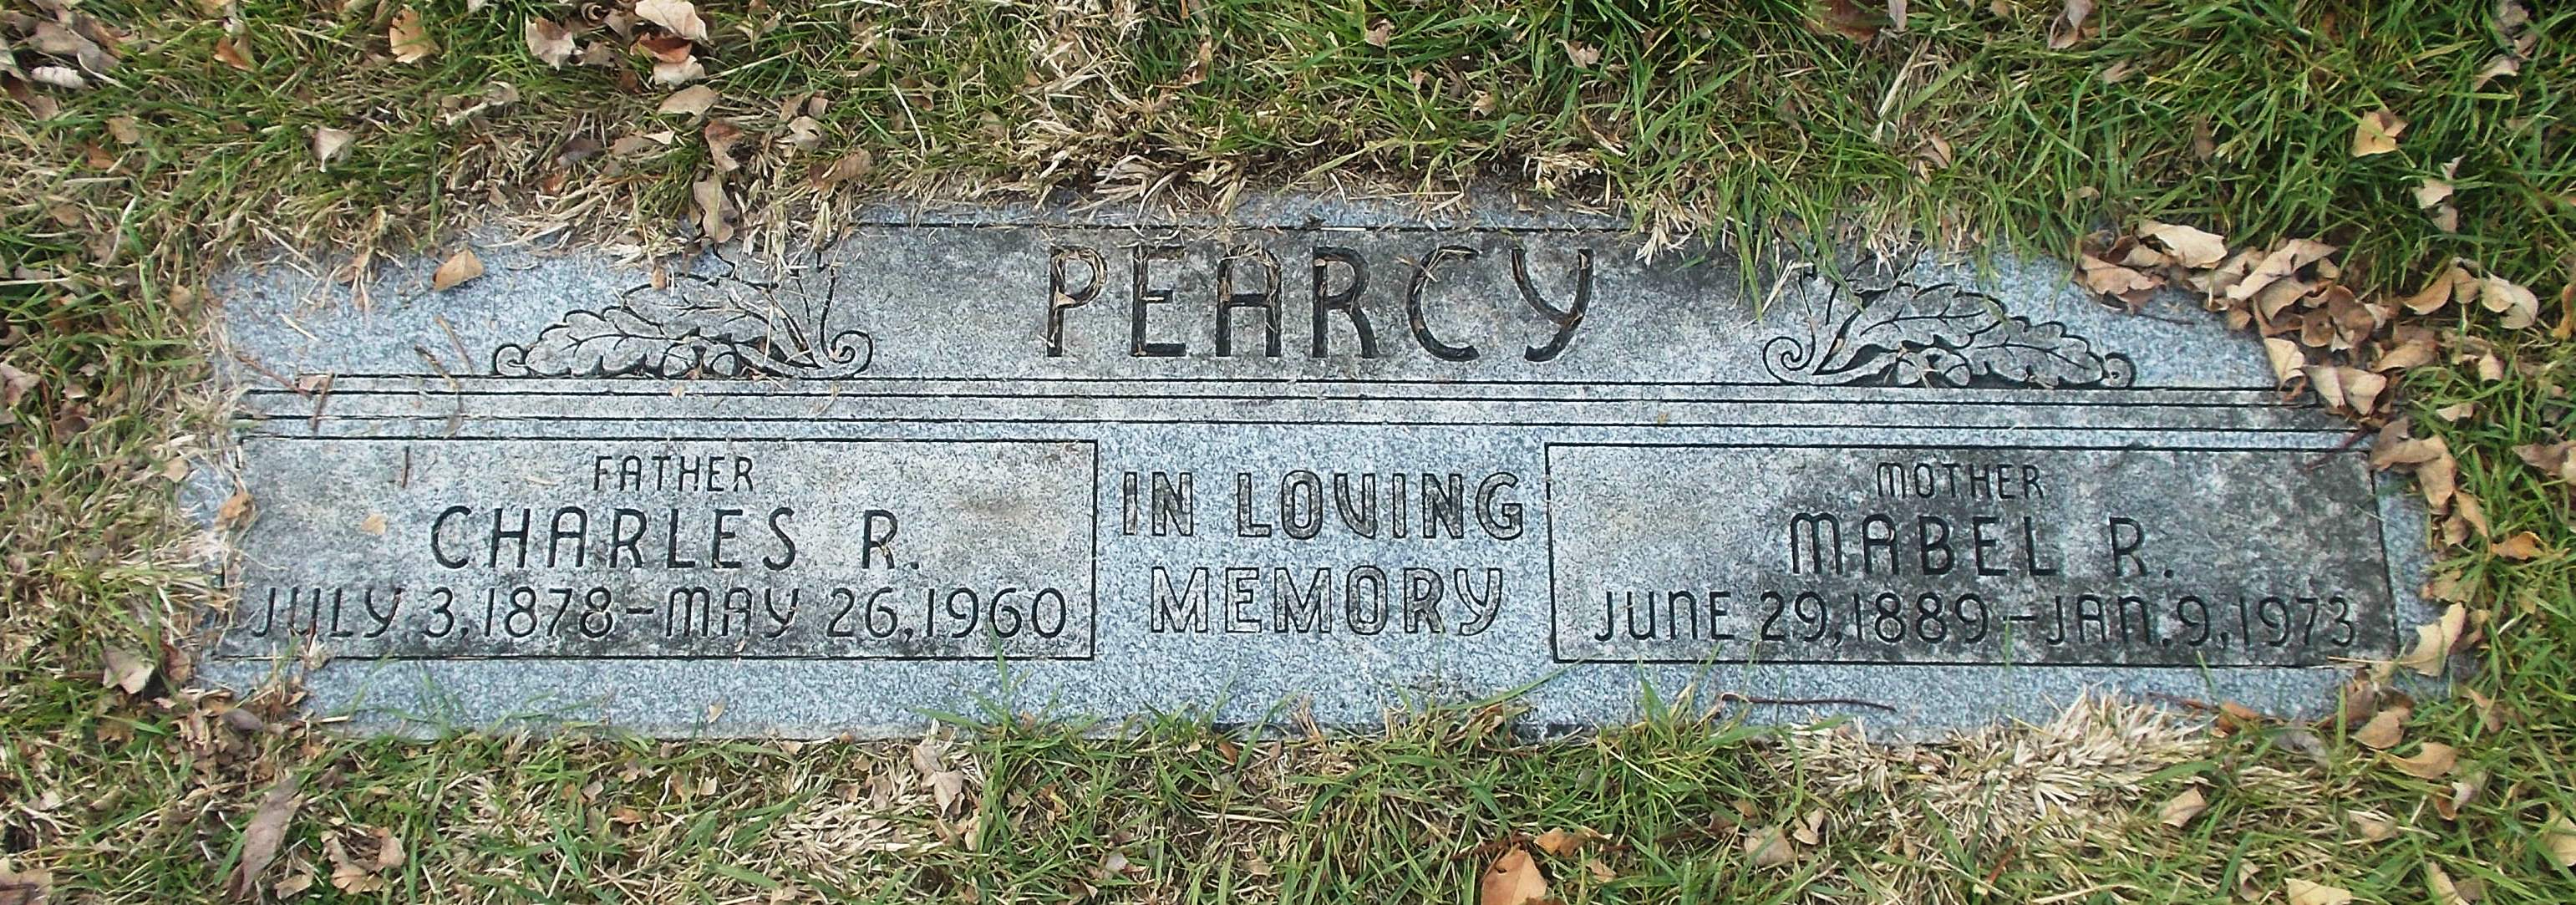 Mabel R Pearcy